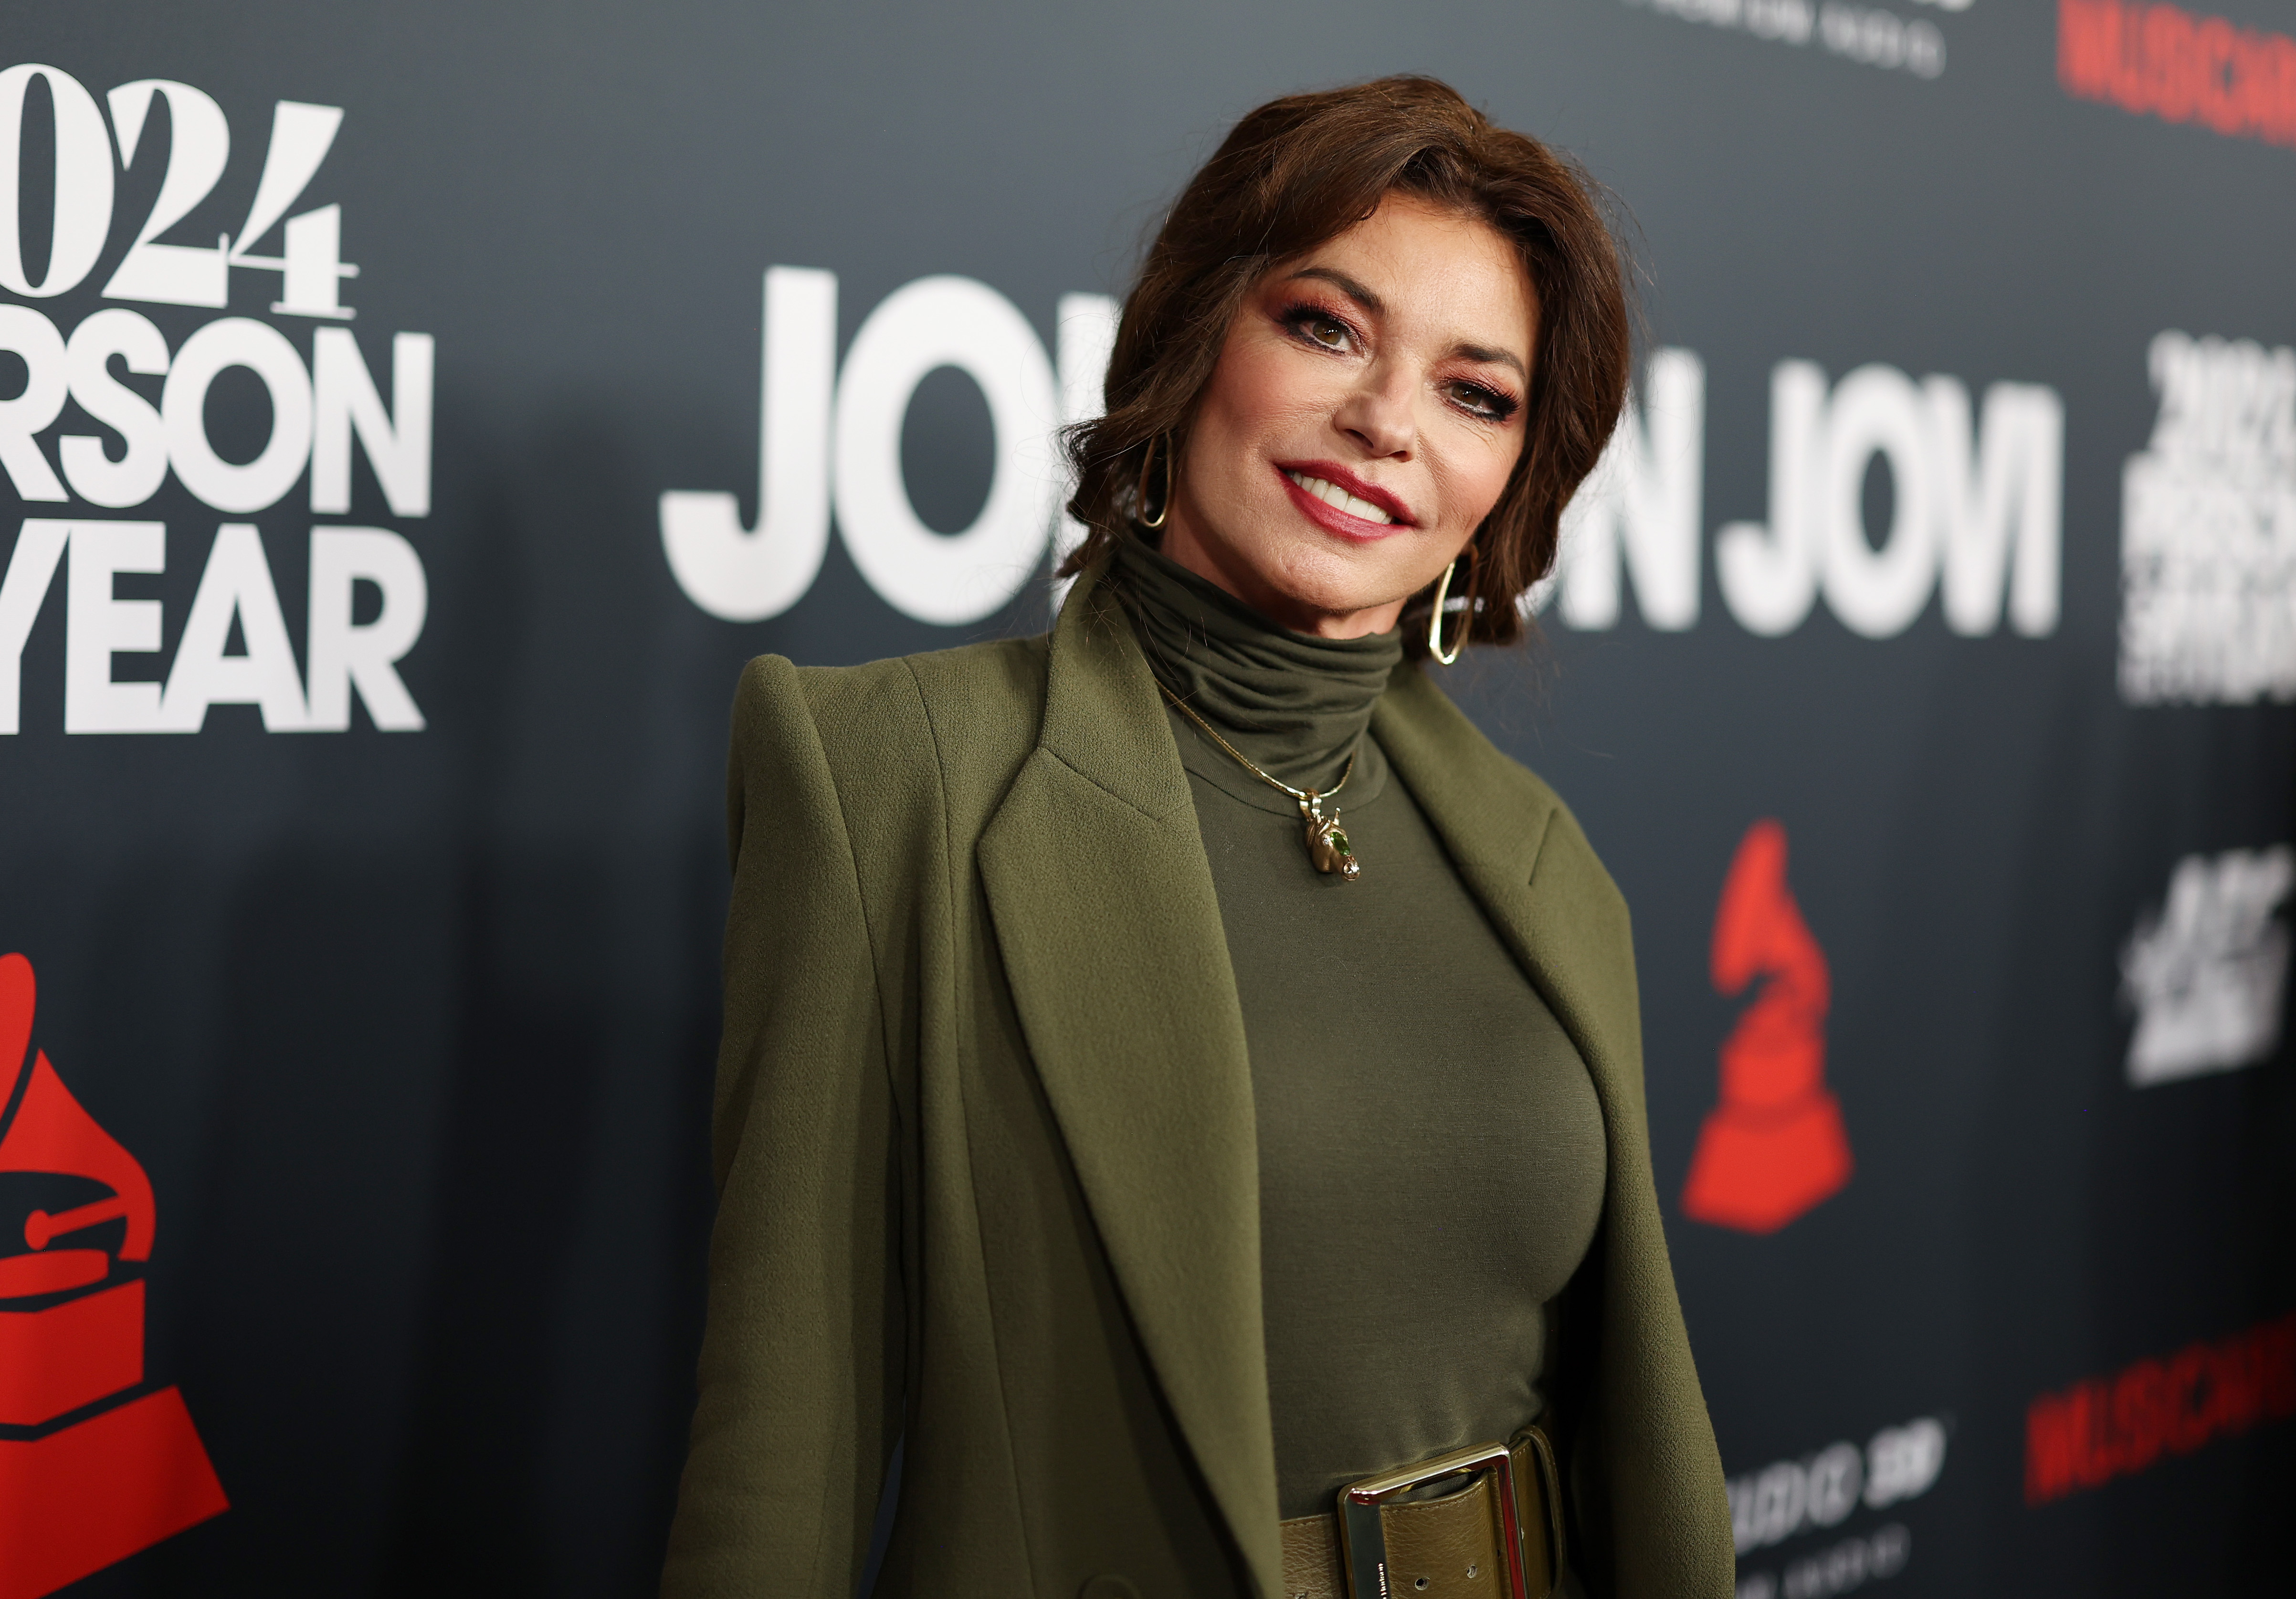 Shania Twain at the 2024 MusiCares Person of the Year Honoring Jon Bon Jovi during the 66th GRAMMY Awards on February 2, 2024, in Los Angeles, California. | Source: Getty Images